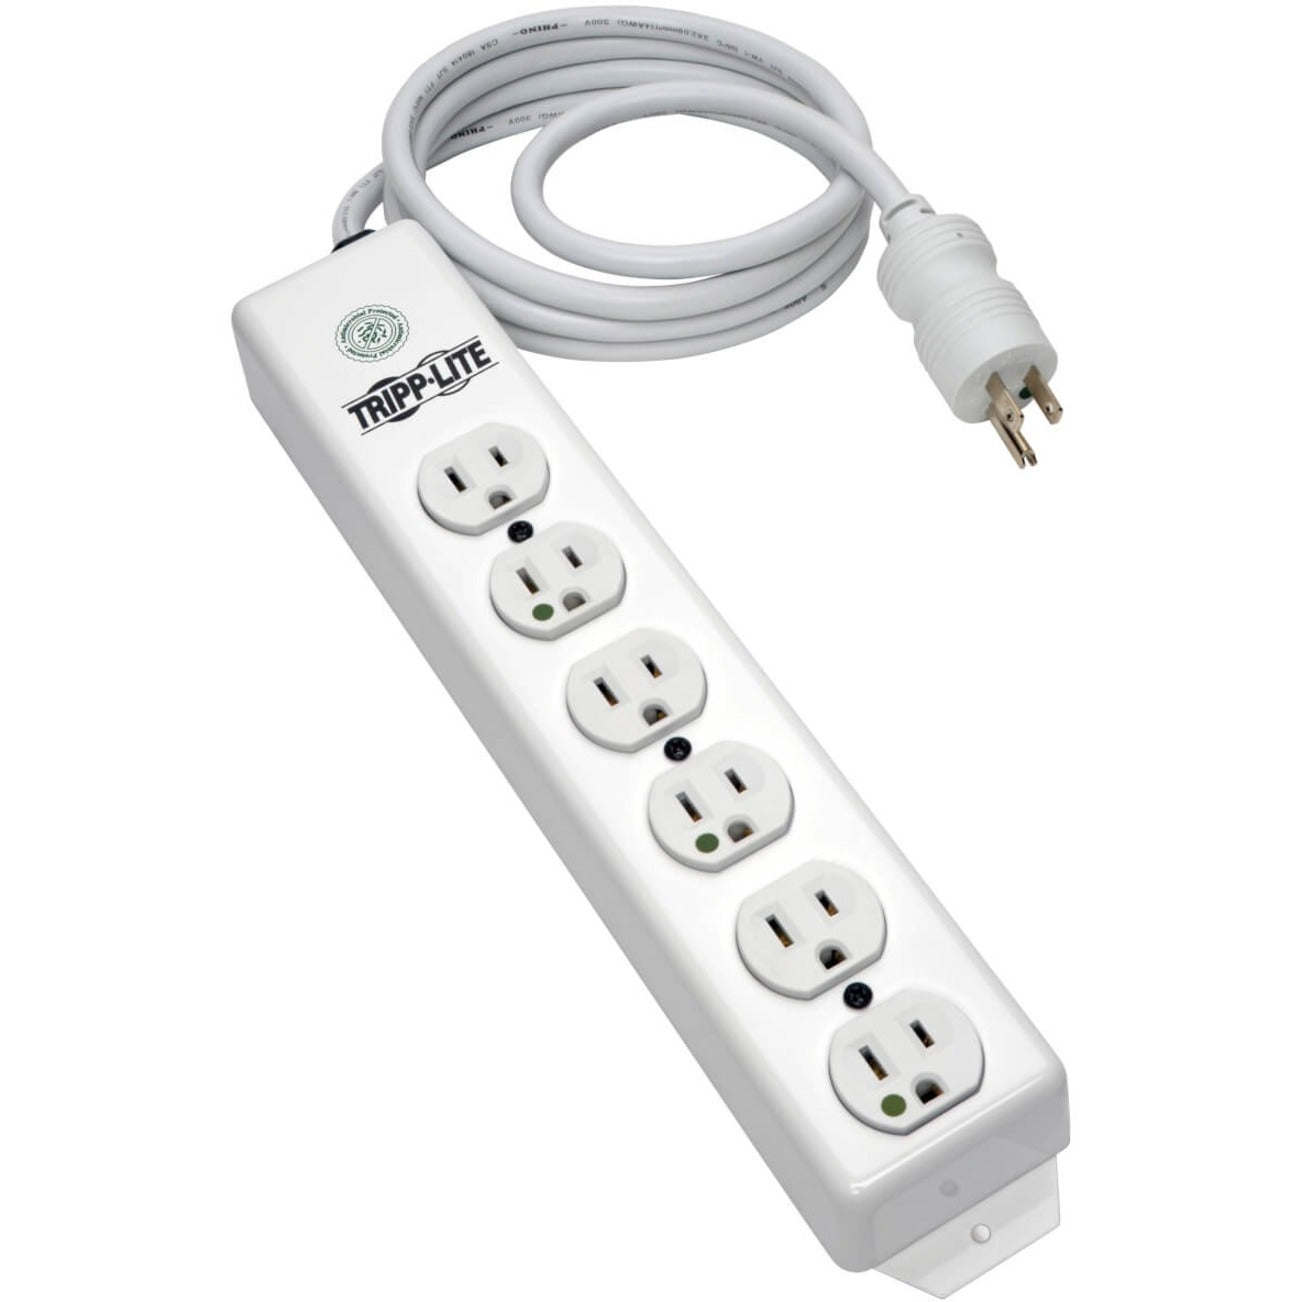 Tripp Lite PS-606-HG Power Strip 120V AC, 6 Outlet with Hospital Grade Plug and Outlets, 6 ft. Cord